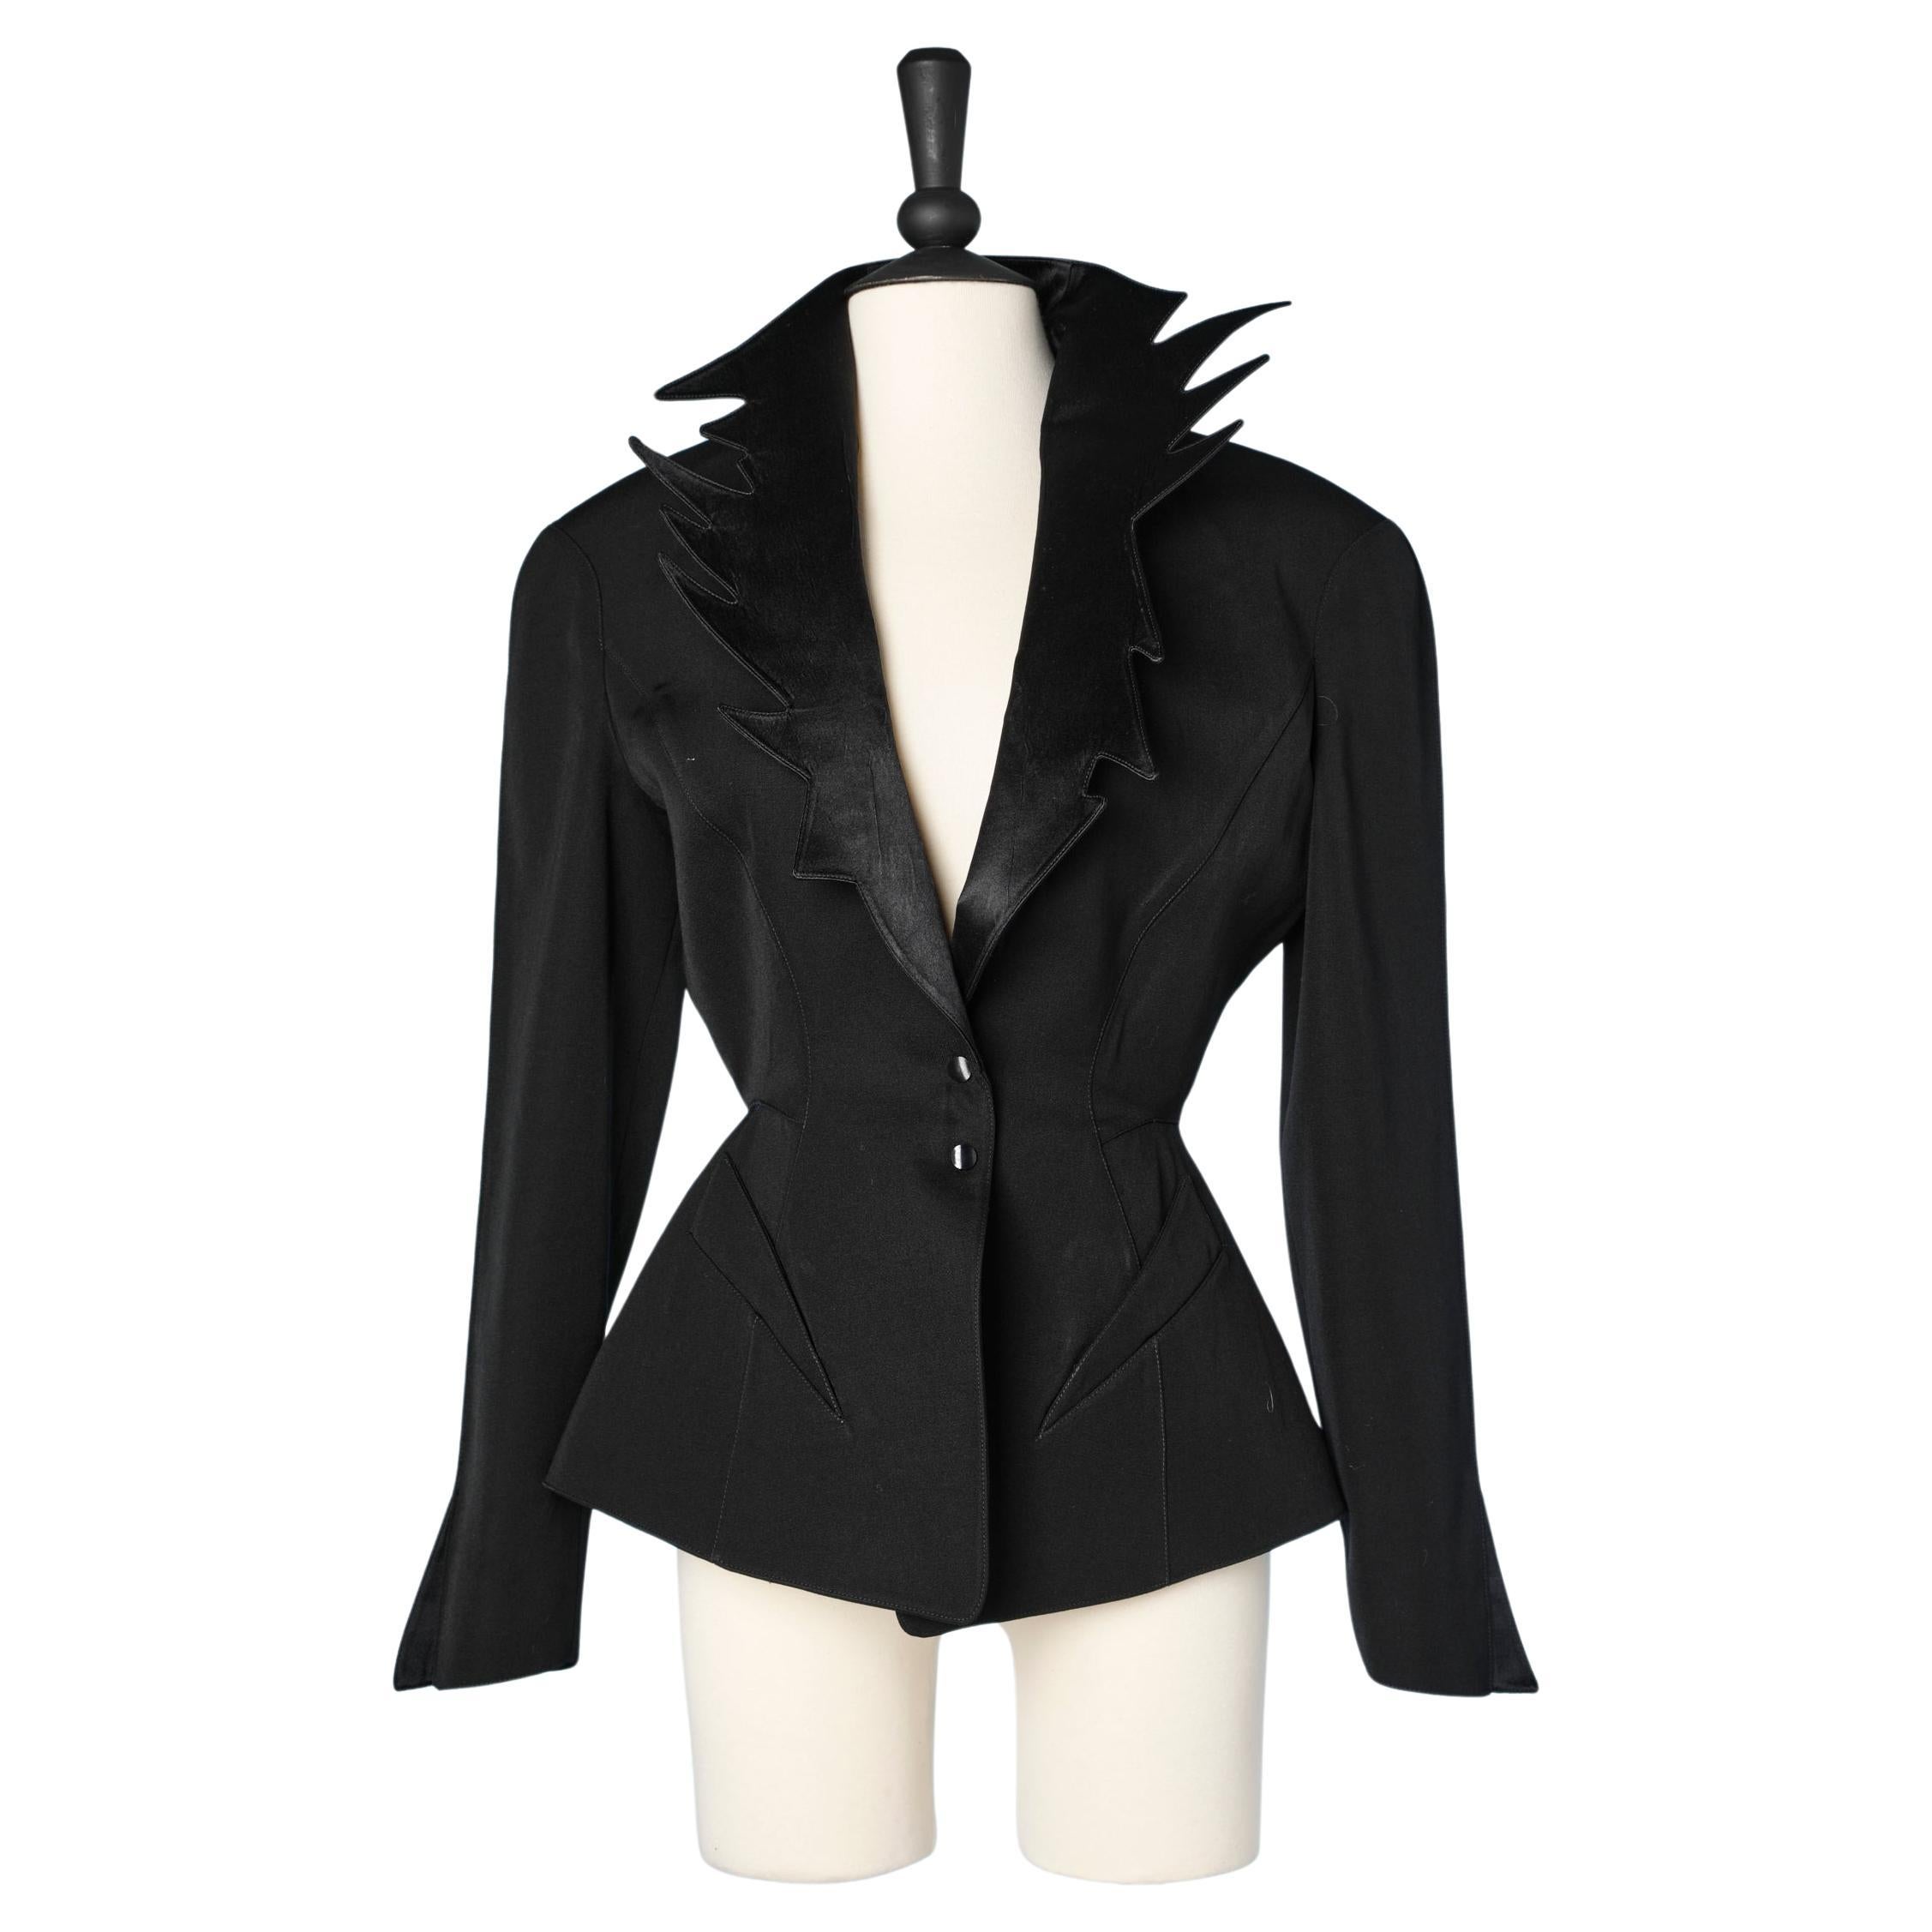  Black jacket with notched satin collar  Thierry Mugler  For Sale